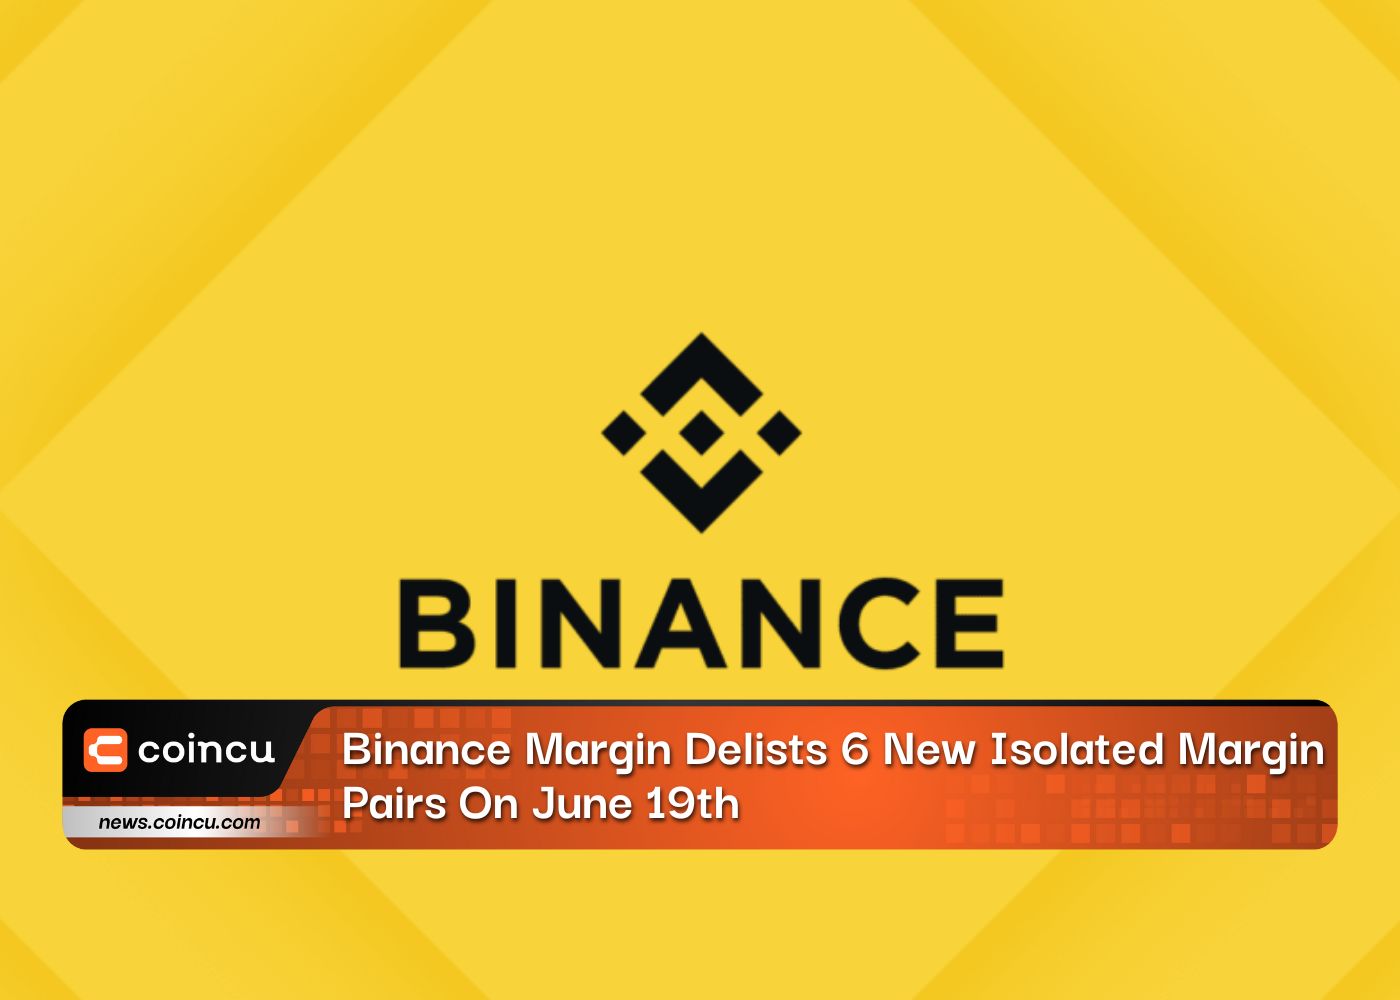 Binance Margin Delists 6 New Isolated Margin Pairs On June 19th